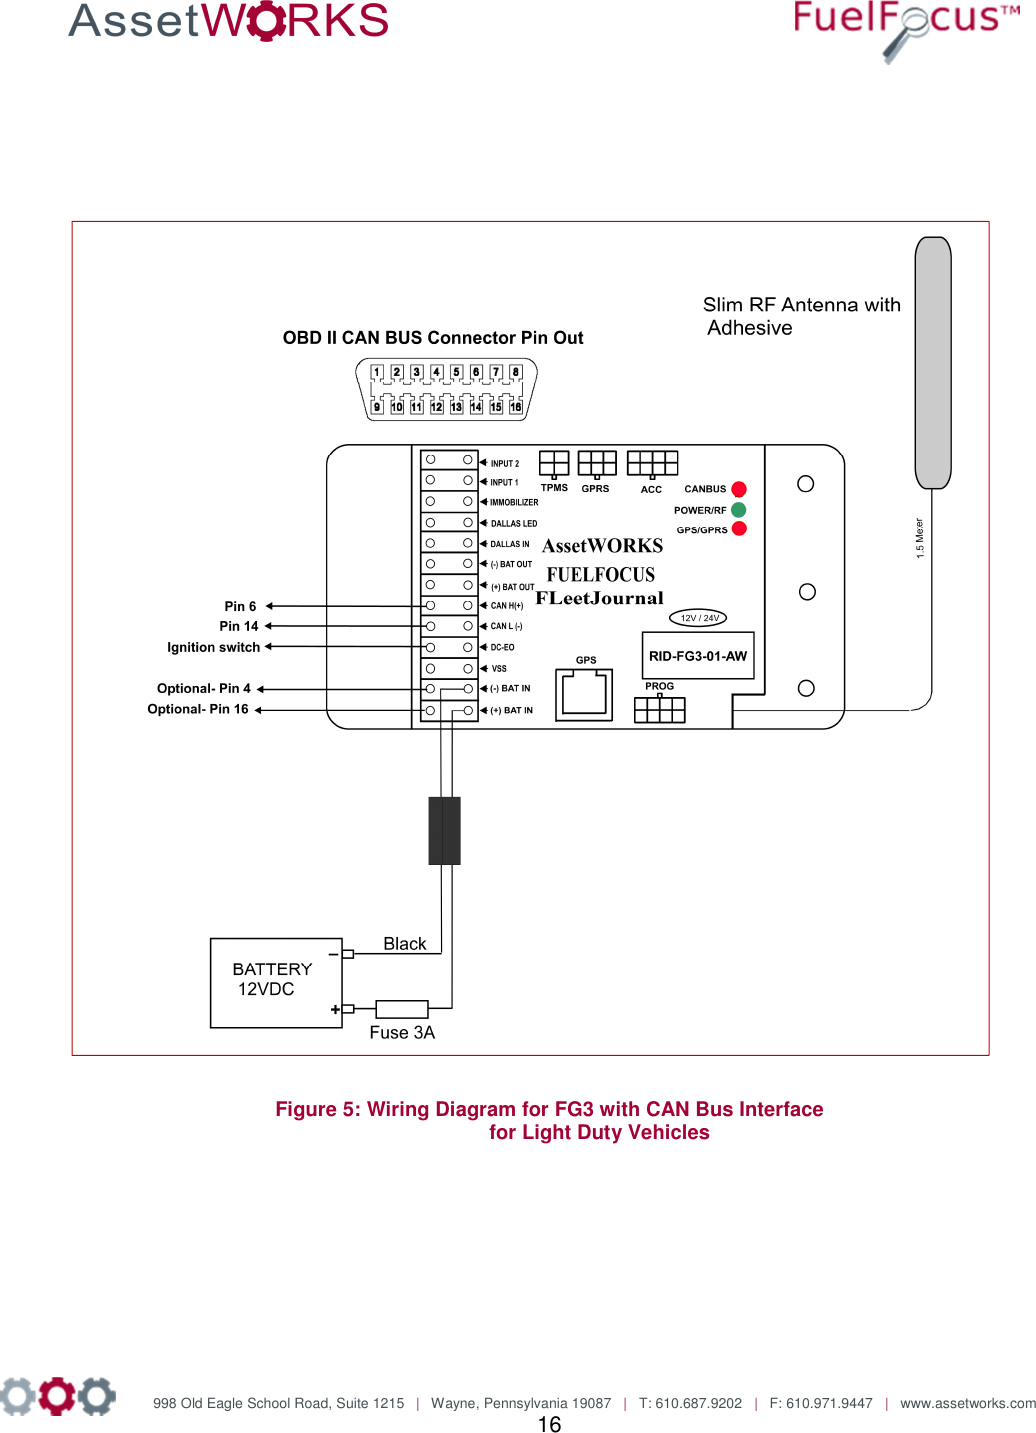               998 Old Eagle School Road, Suite 1215   |   Wayne, Pennsylvania 19087   |   T: 610.687.9202   |   F: 610.971.9447   |   www.assetworks.com 16       Figure 5: Wiring Diagram for FG3 with CAN Bus Interface  for Light Duty Vehicles 